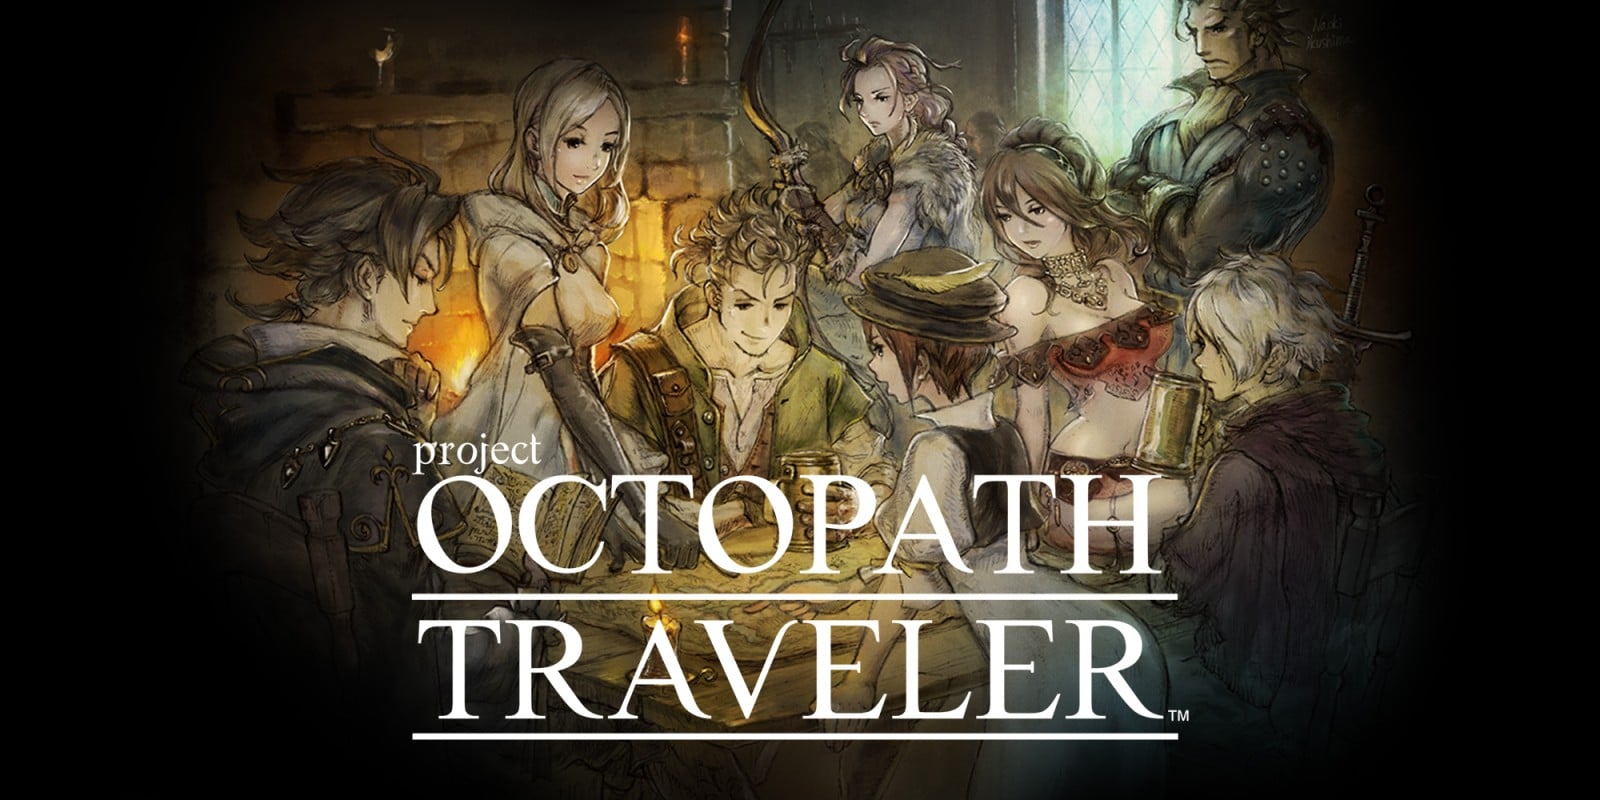 Music recording finished for Project Octopath Traveler